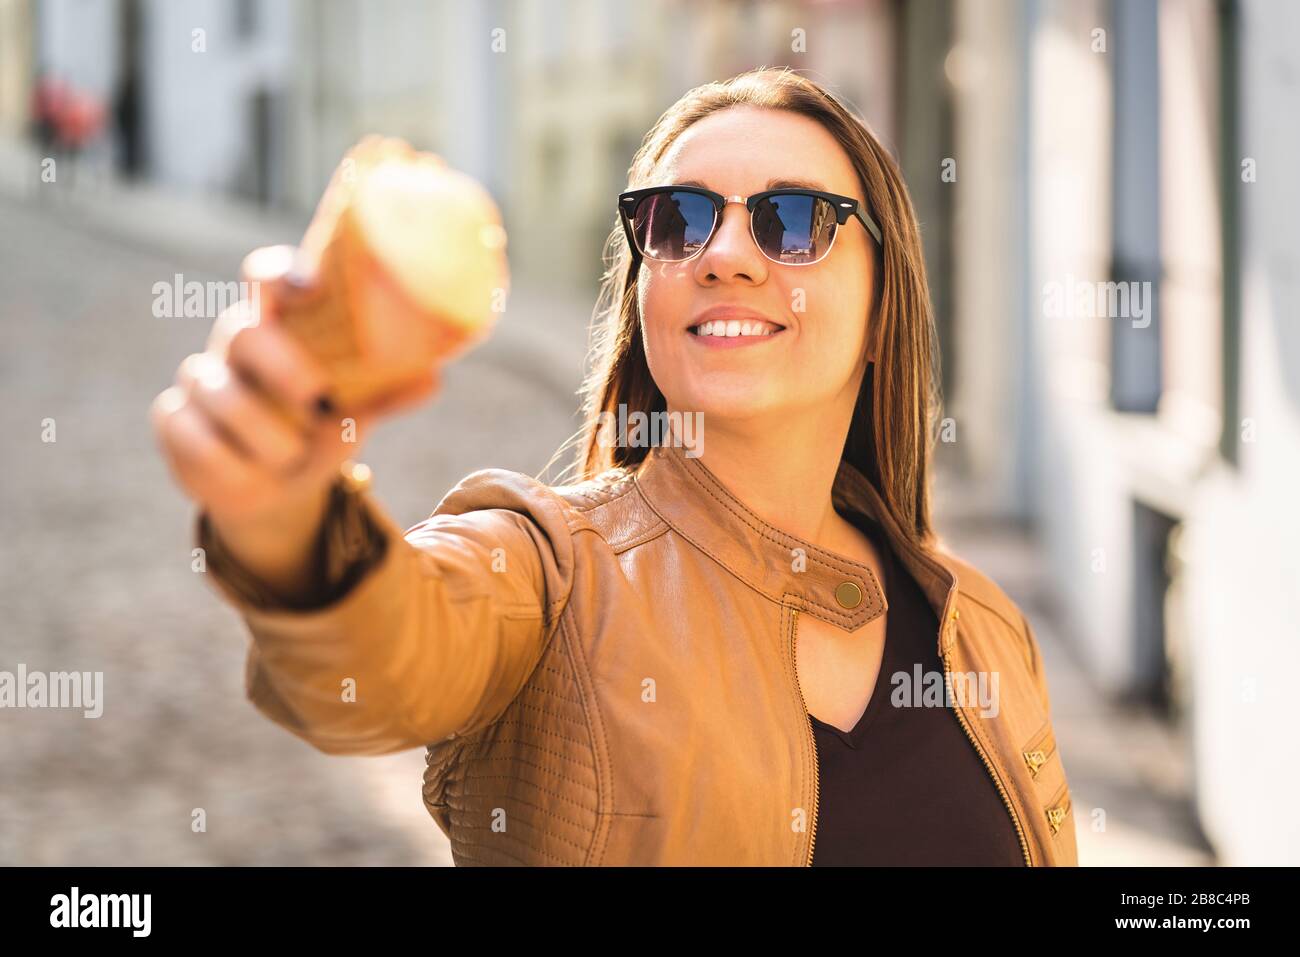 Smiling woman showing and pointing an ice cream cone at camera. Person goofing and messing around with sweet dessert in the city. Stock Photo